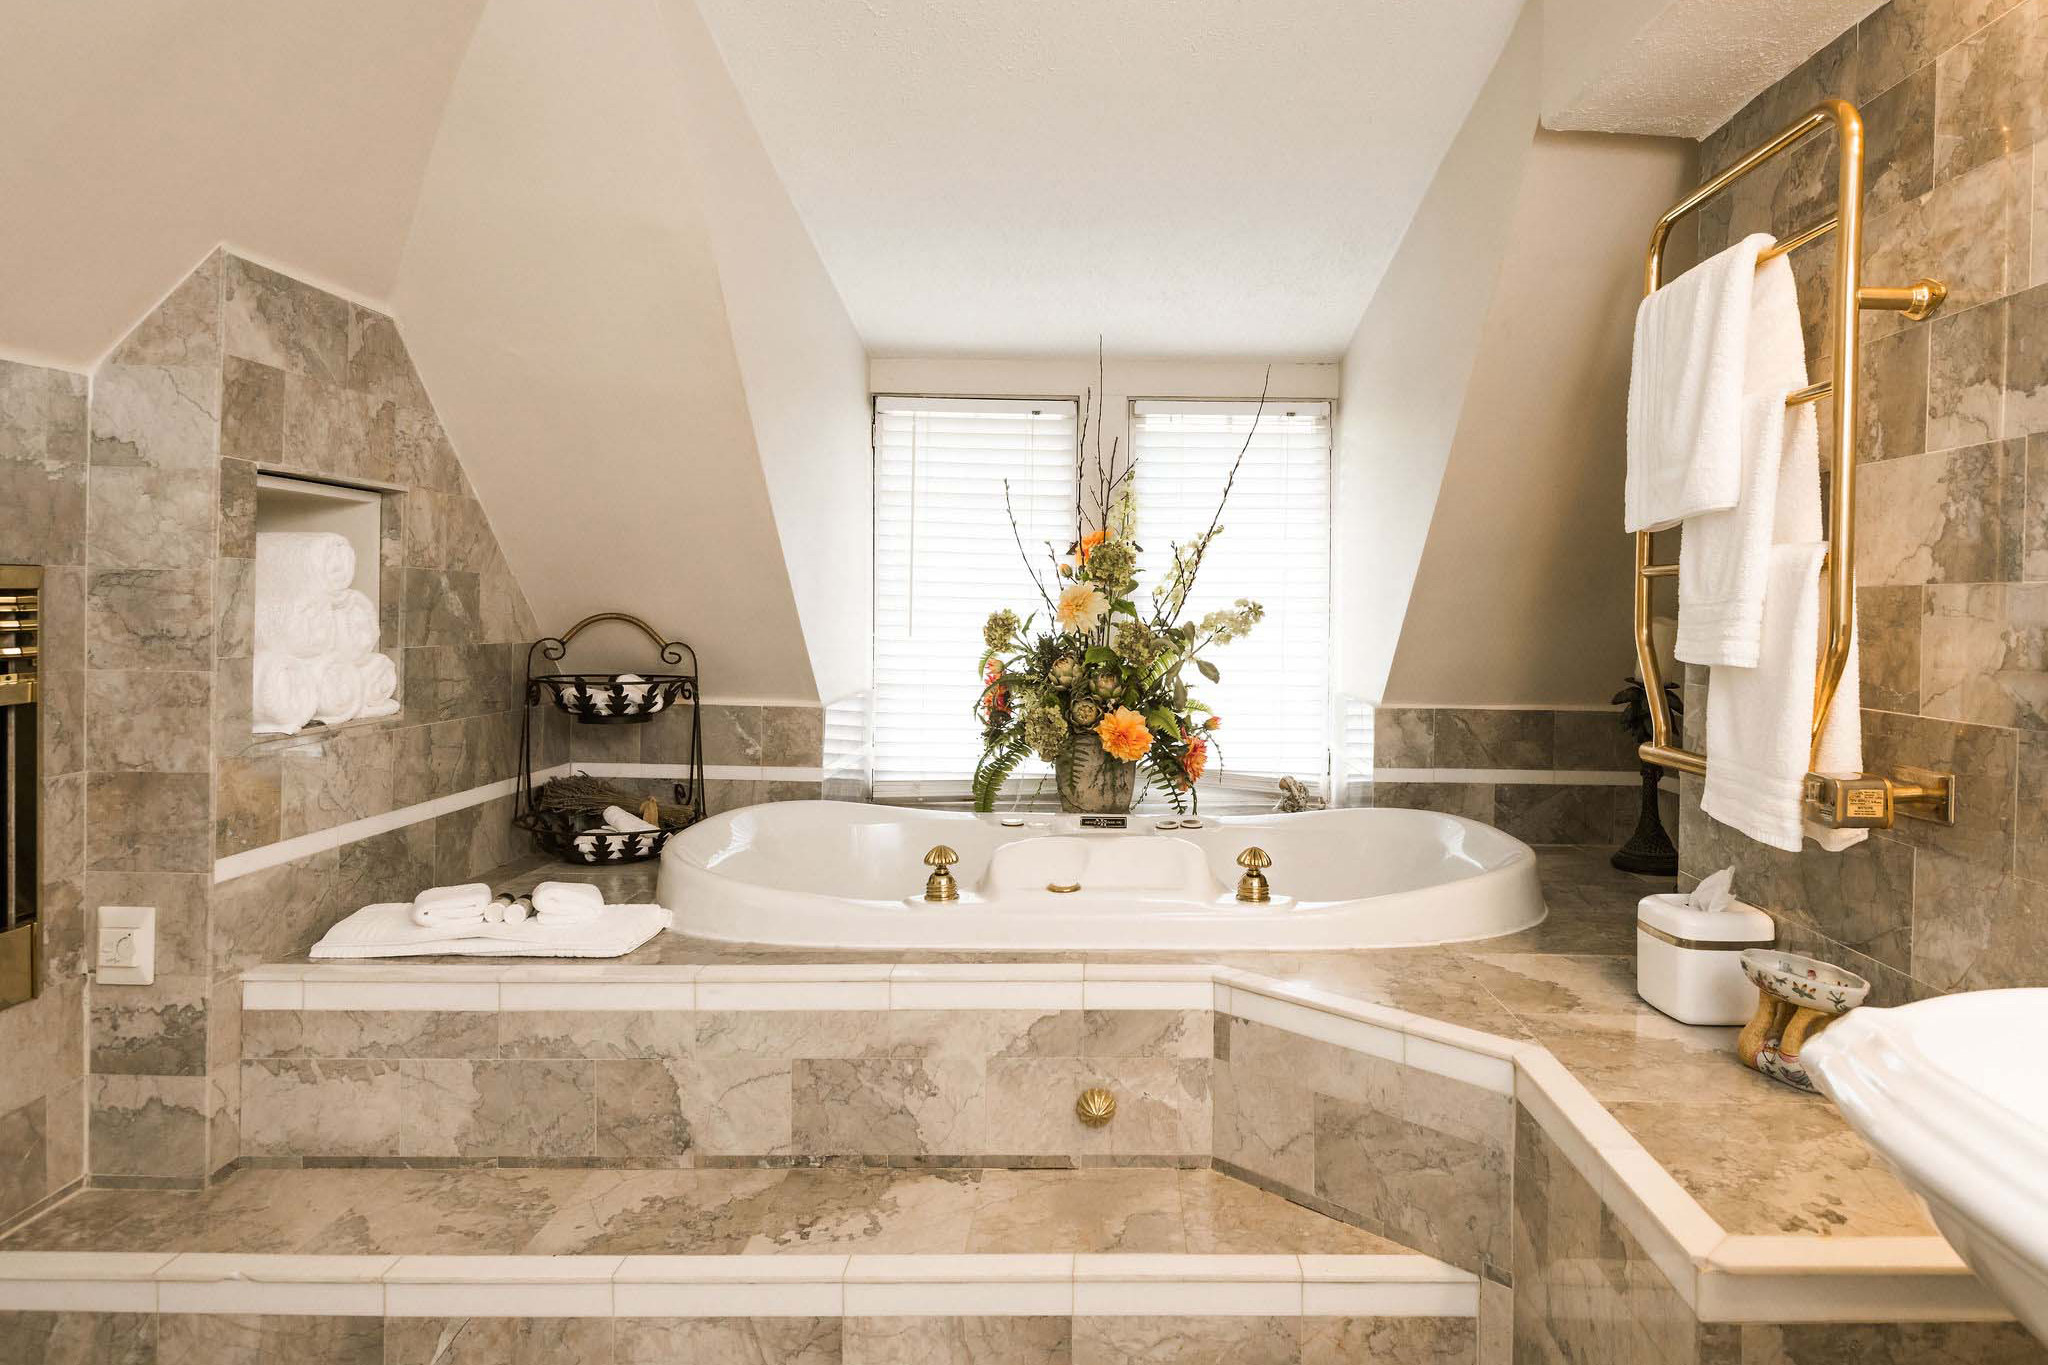 A luxurious white marble bathroom with heated floors and an elevated two-person Whirlpool bathtub, part of a 5-room suite in an Asheville bnb.